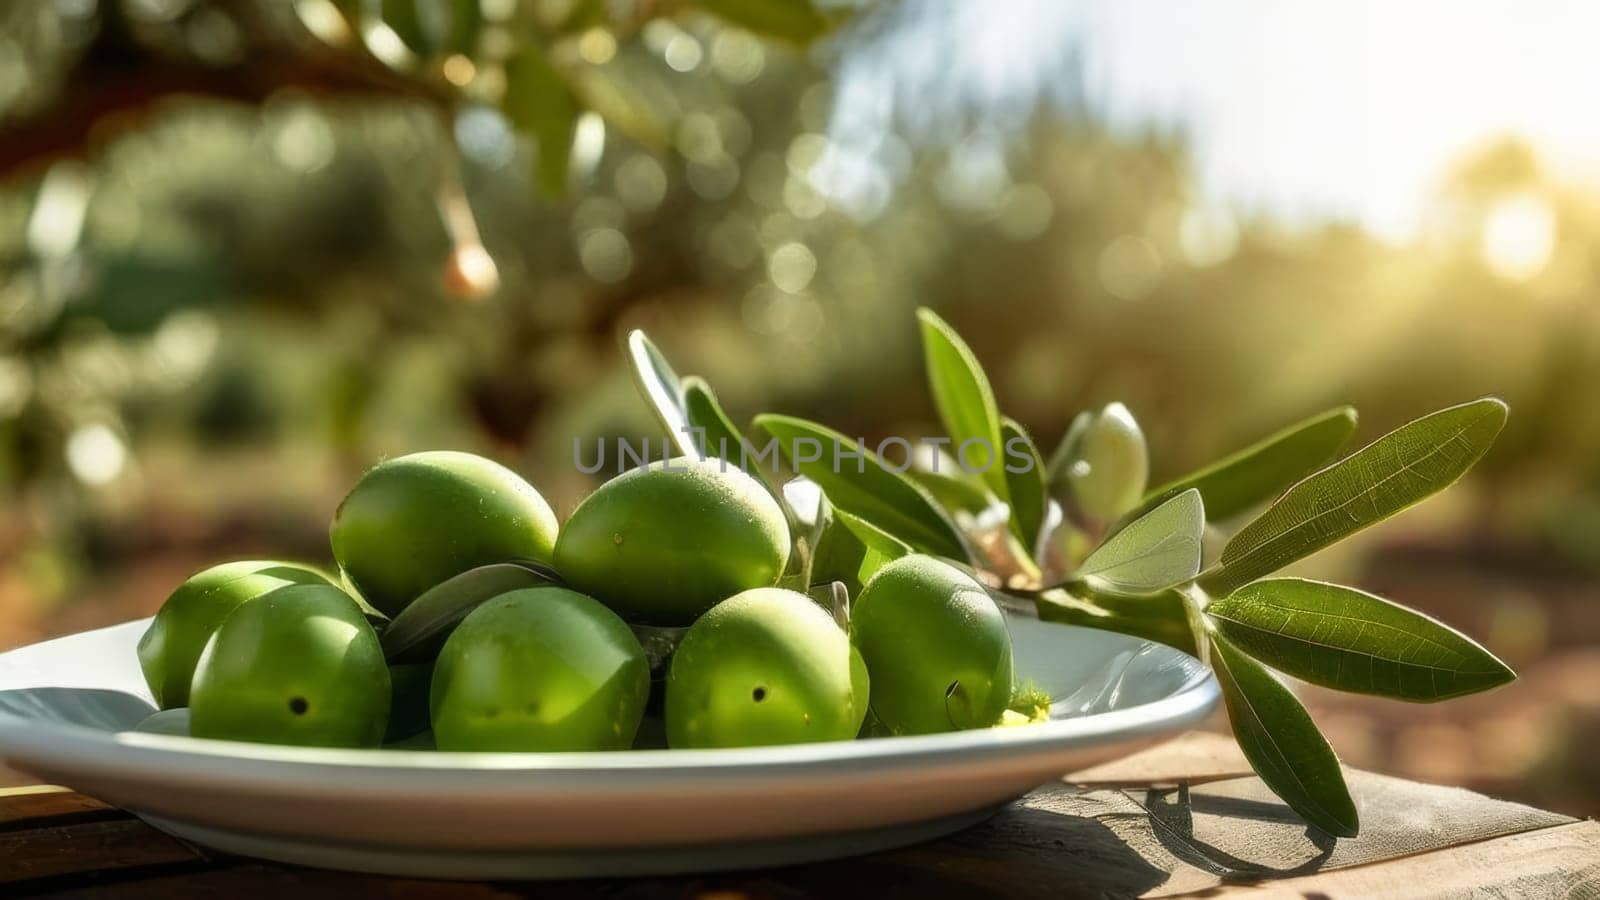 A dish of green olives, a fruit from the olive family, placed on a table by fascinadora